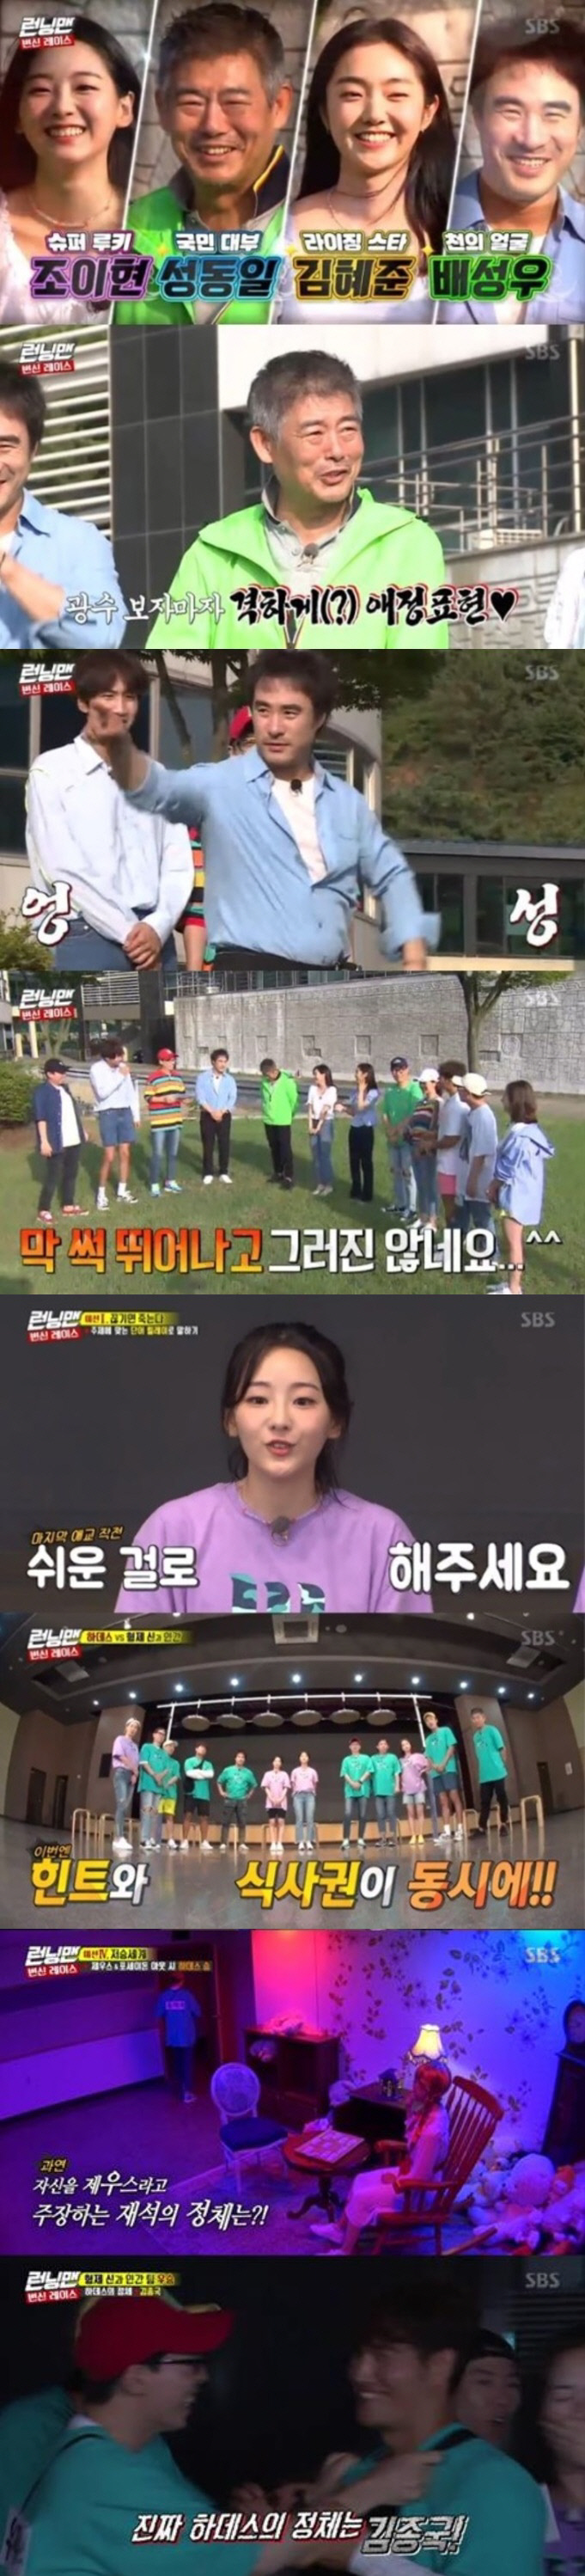 SBS Running Man took the top spot in the same time zone of 2049 target audience rating with a big gap.According to Nielsen Korea, the ratings agency, Running Man, which was broadcast on the 11th (Sunday), soared to 8.4% of the highest audience rating per minute, and the 2049 target audience rating, an important indicator of major advertising officials, recorded 3.7% (based on the second part of the audience rating of households in the metropolitan area).The show was accompanied by actor Sung Dong-il, Bae Seong-woo, Jo Yi-hyun and Kim Hye-joon of the movie Transform.The members challenged various missions to find Hades, Zeus, and Poseidon gods, and the chewy race that led to doubting each other until the end was exciting.Along with this, the performance of the guests also shone.Sung Dong-il, like Lee Kwang-soos natural enemy, tightened Lee Kwang-soos breath and made a penalty, while Bae Seong-woo laughed with the charm of introducing a clumsy ballet.The final mission was decorated with the horror special The Underworld Race.In order for the brothers and men to win the championship, they have to make Hades in-N-Out Burger, and if Hades makes Zeus and Poseidon in In-N-Out Burger, Hades will win alone.The members gathered hints at the appearance of ghosts in the race, and Yoo Jae-Suk and Kim Jong-kook were selected as candidates for Hades.In the meantime, Yoo Jae-Suk put Kim Jong-kooks name tag on the Hades chair that Lee Kwang-soo found, and finally Hades was revealed as Kim Jong-kook.The scene recorded the highest audience rating of 8.4% per minute, accounting for the best one minute.SBS Running Man is broadcast every Sunday at 5 pm.